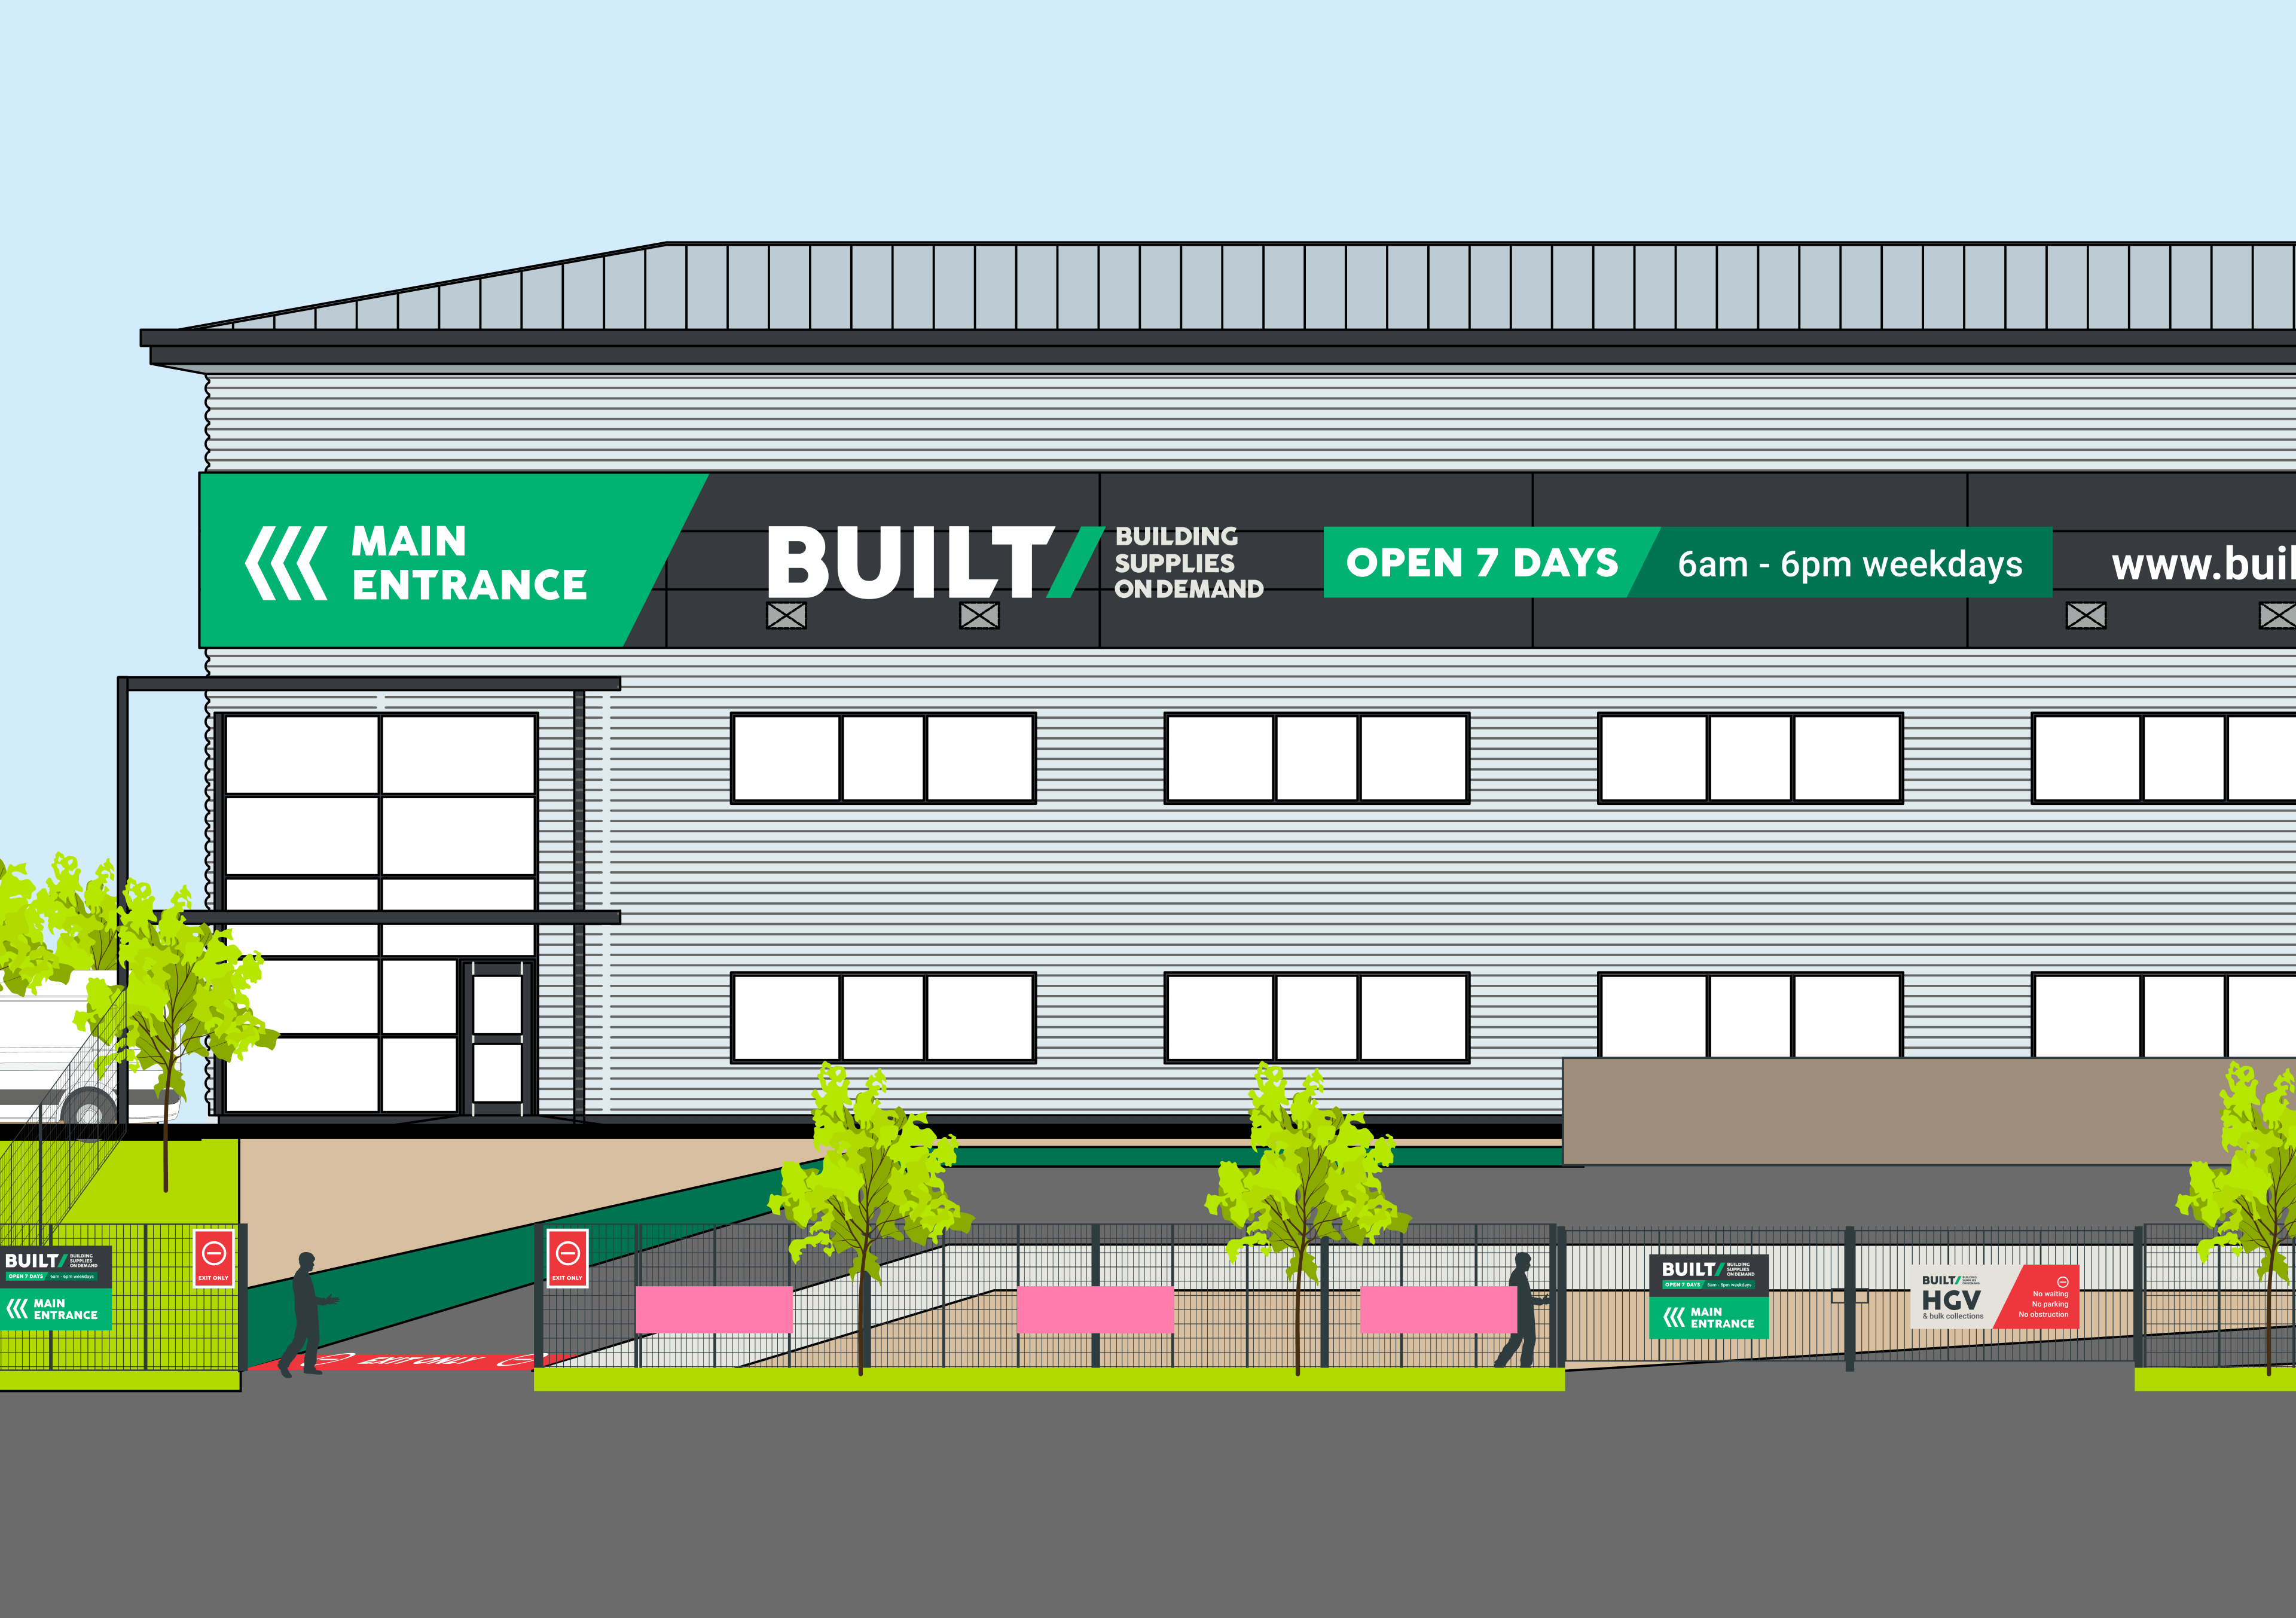 A digital illustration of a grey warehouse with green Built signage concepts along the top of the exterior.